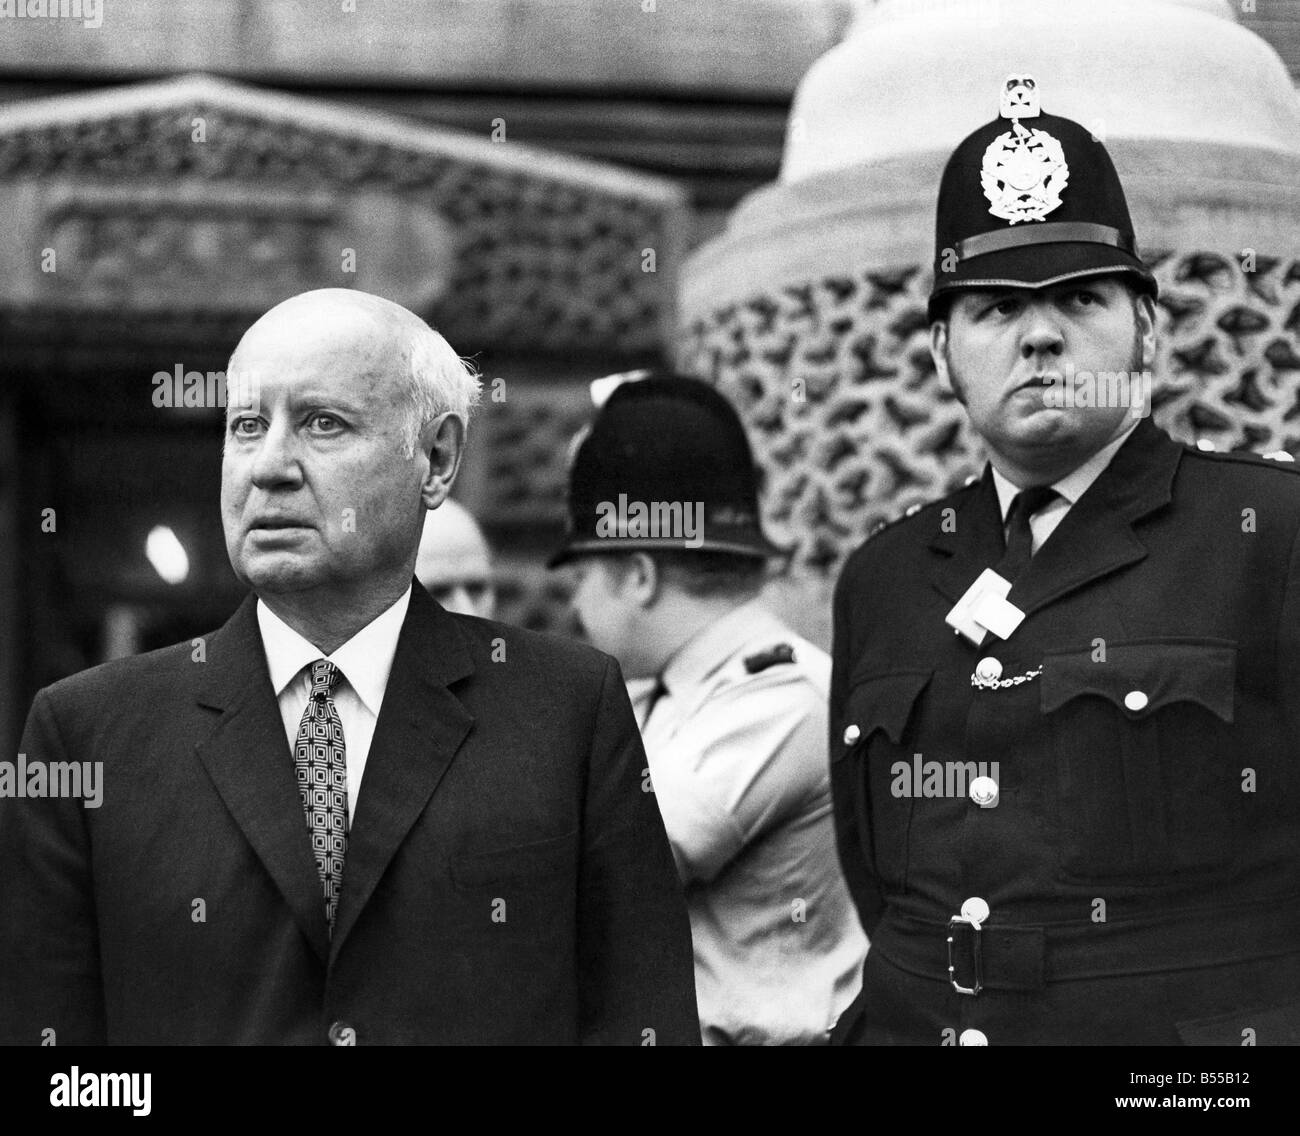 John Poulson former international architect leaves Leeds Magistrates court after being charged with involvement in bribery conspiracy. June 1973 P012528 Stock Photo